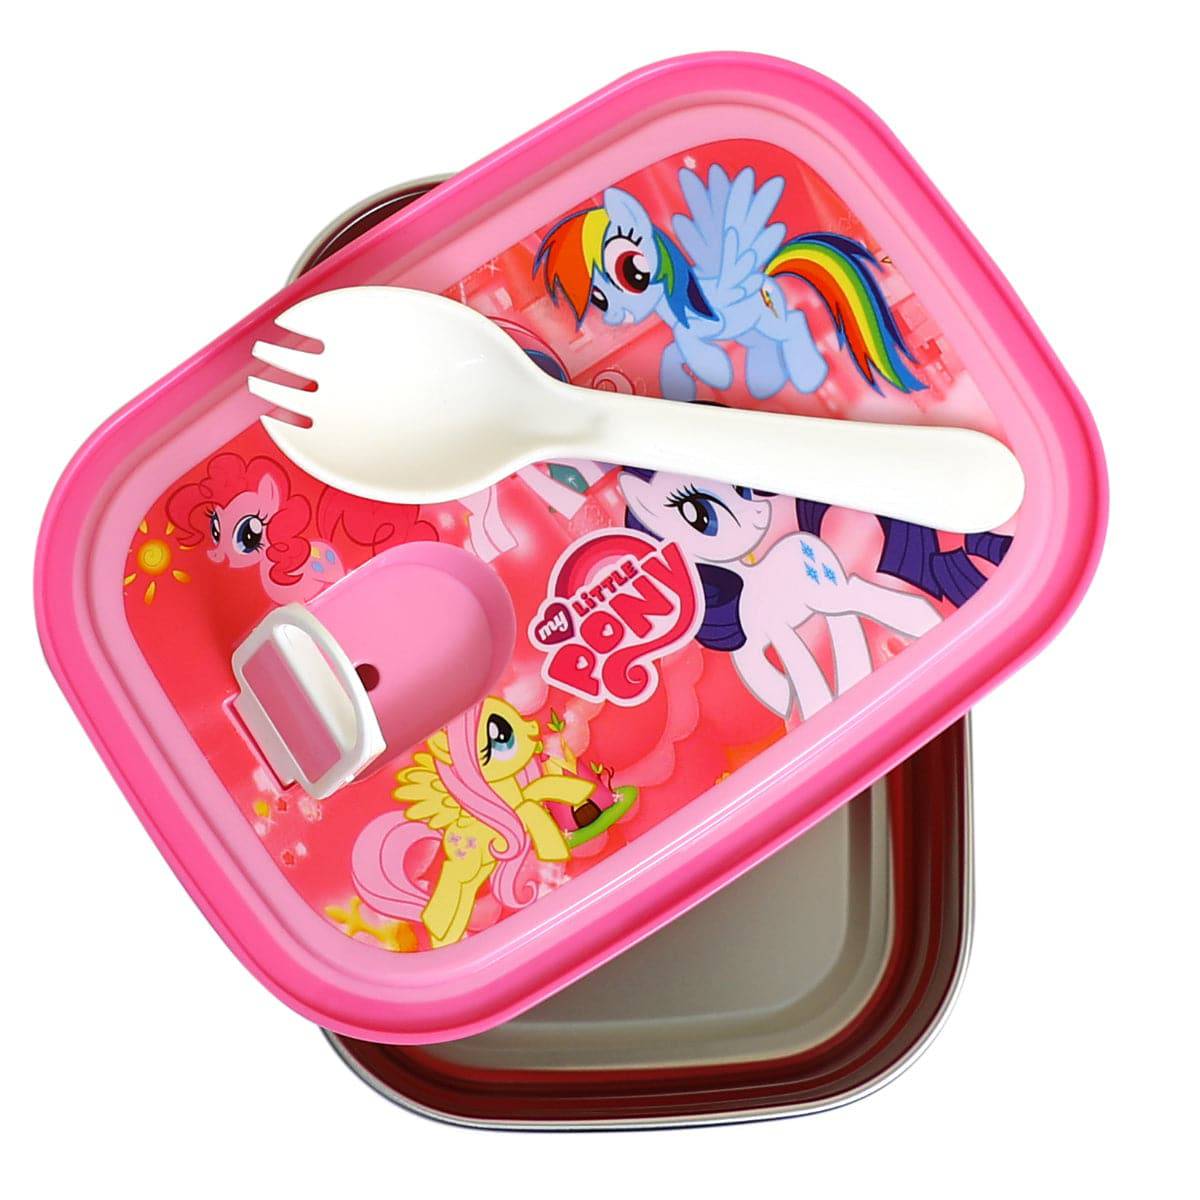 LUNCH BOX 5611 CHARACTER 4899